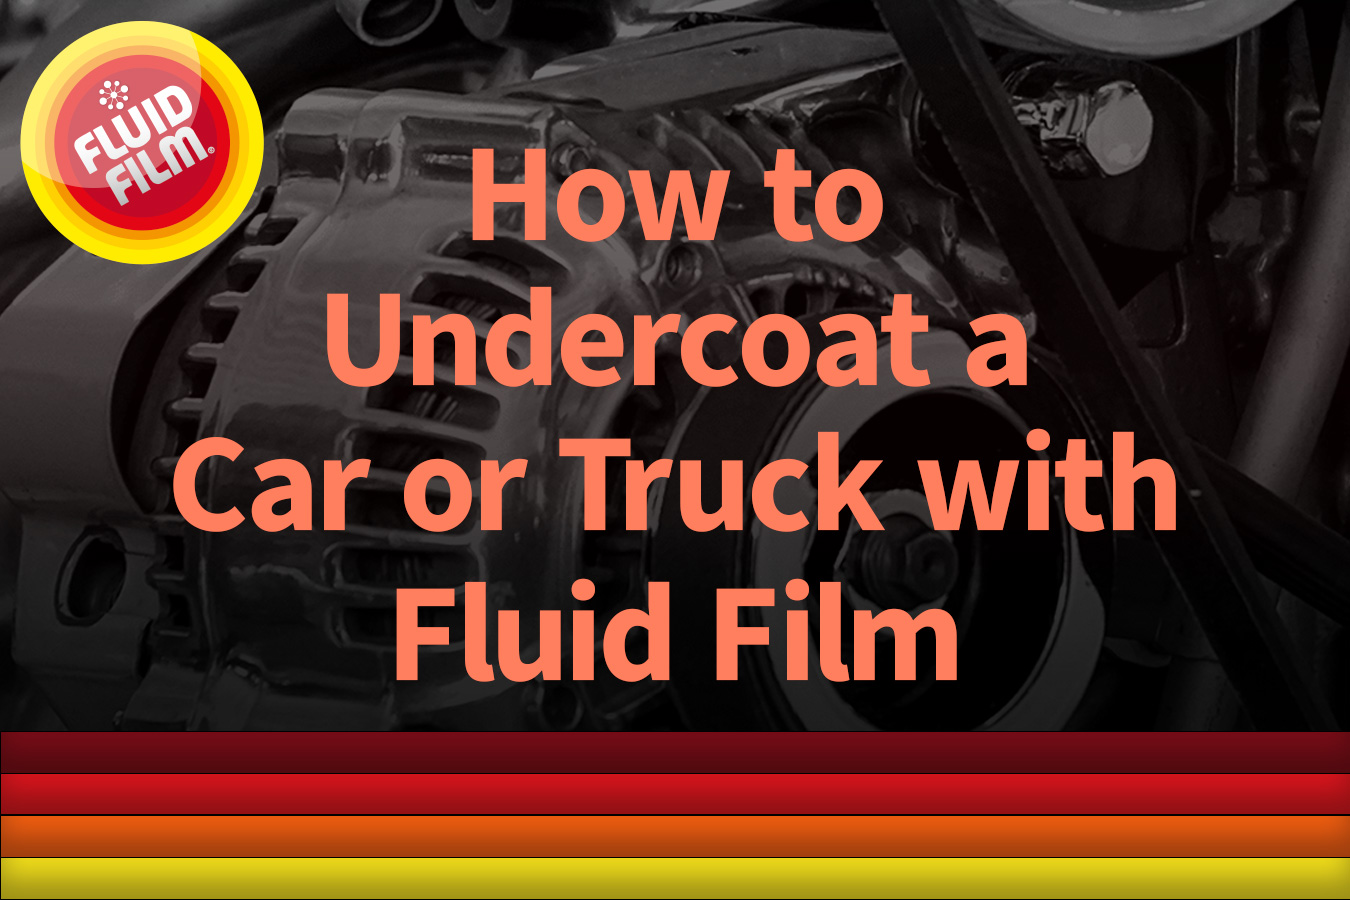 How to undercoat a car or truck with Fluid Film